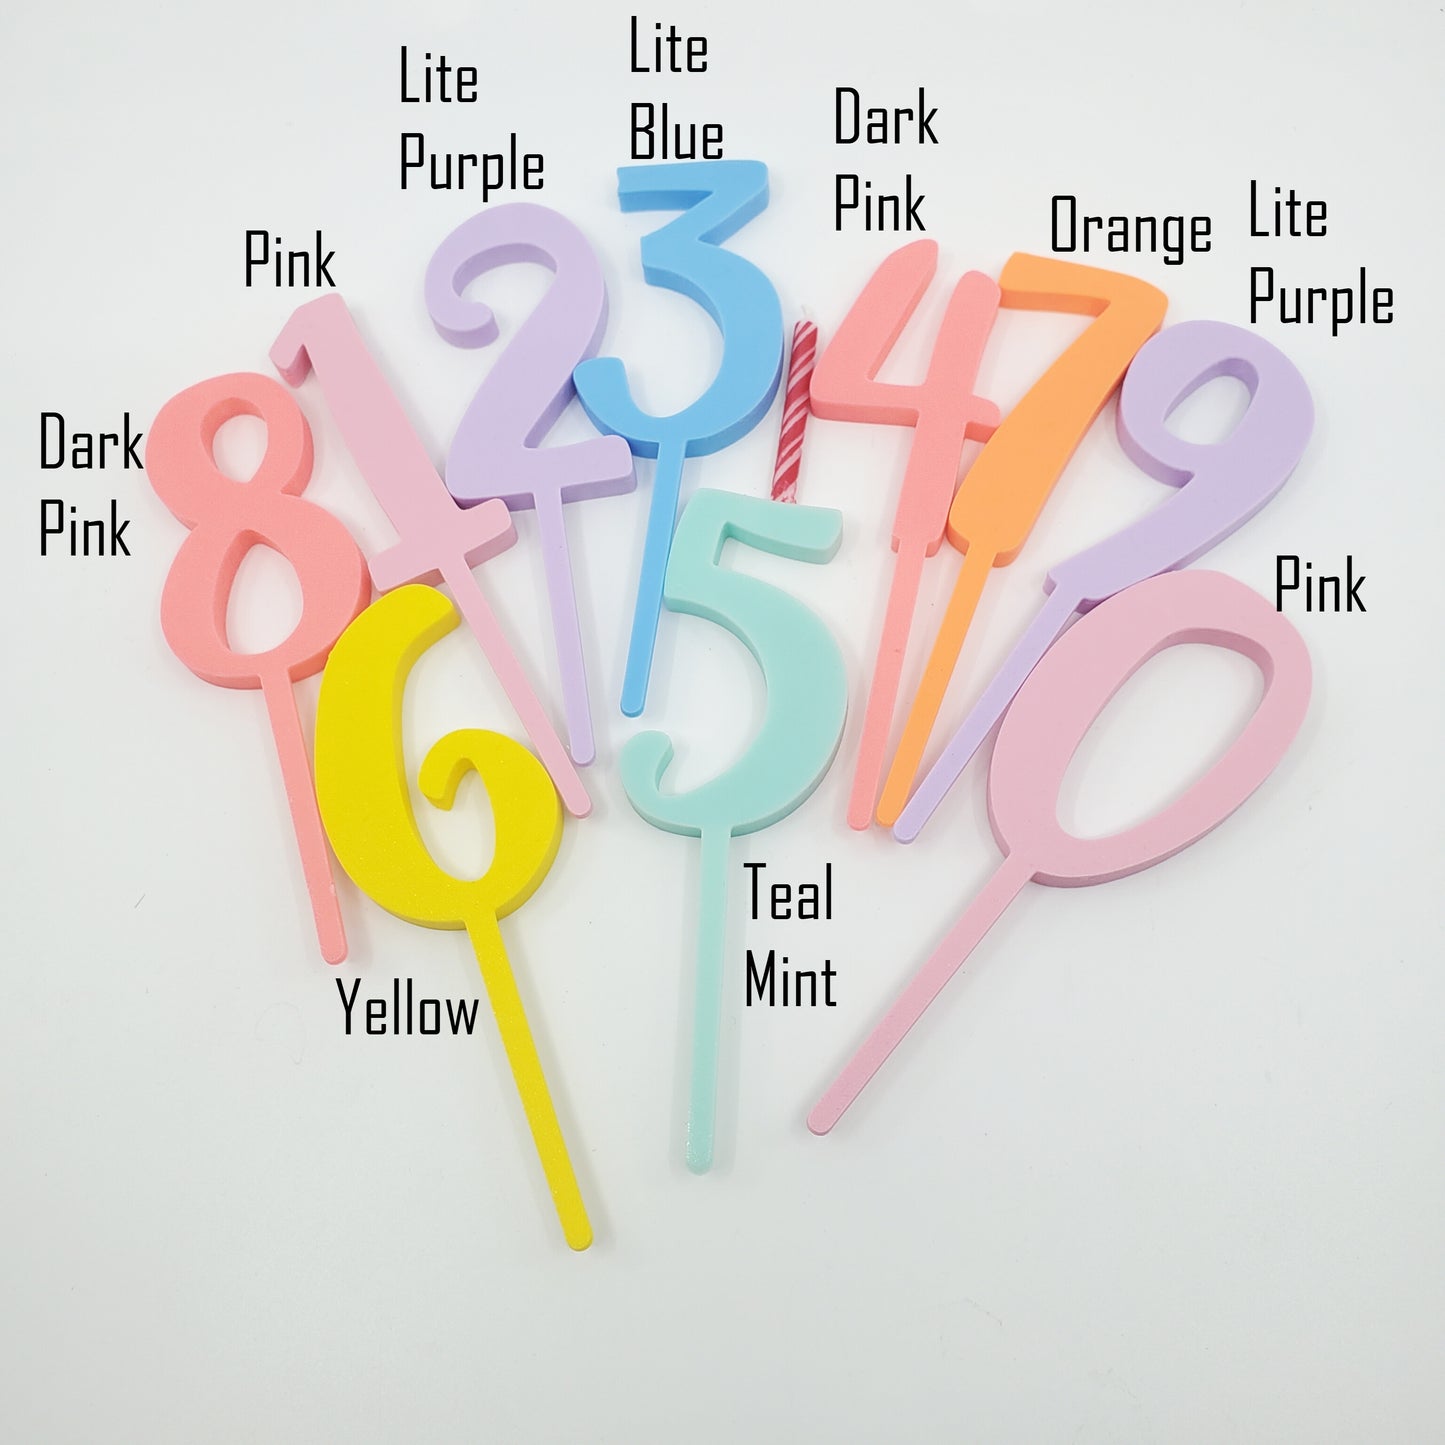 Number Cake Toppers (Set of 10)